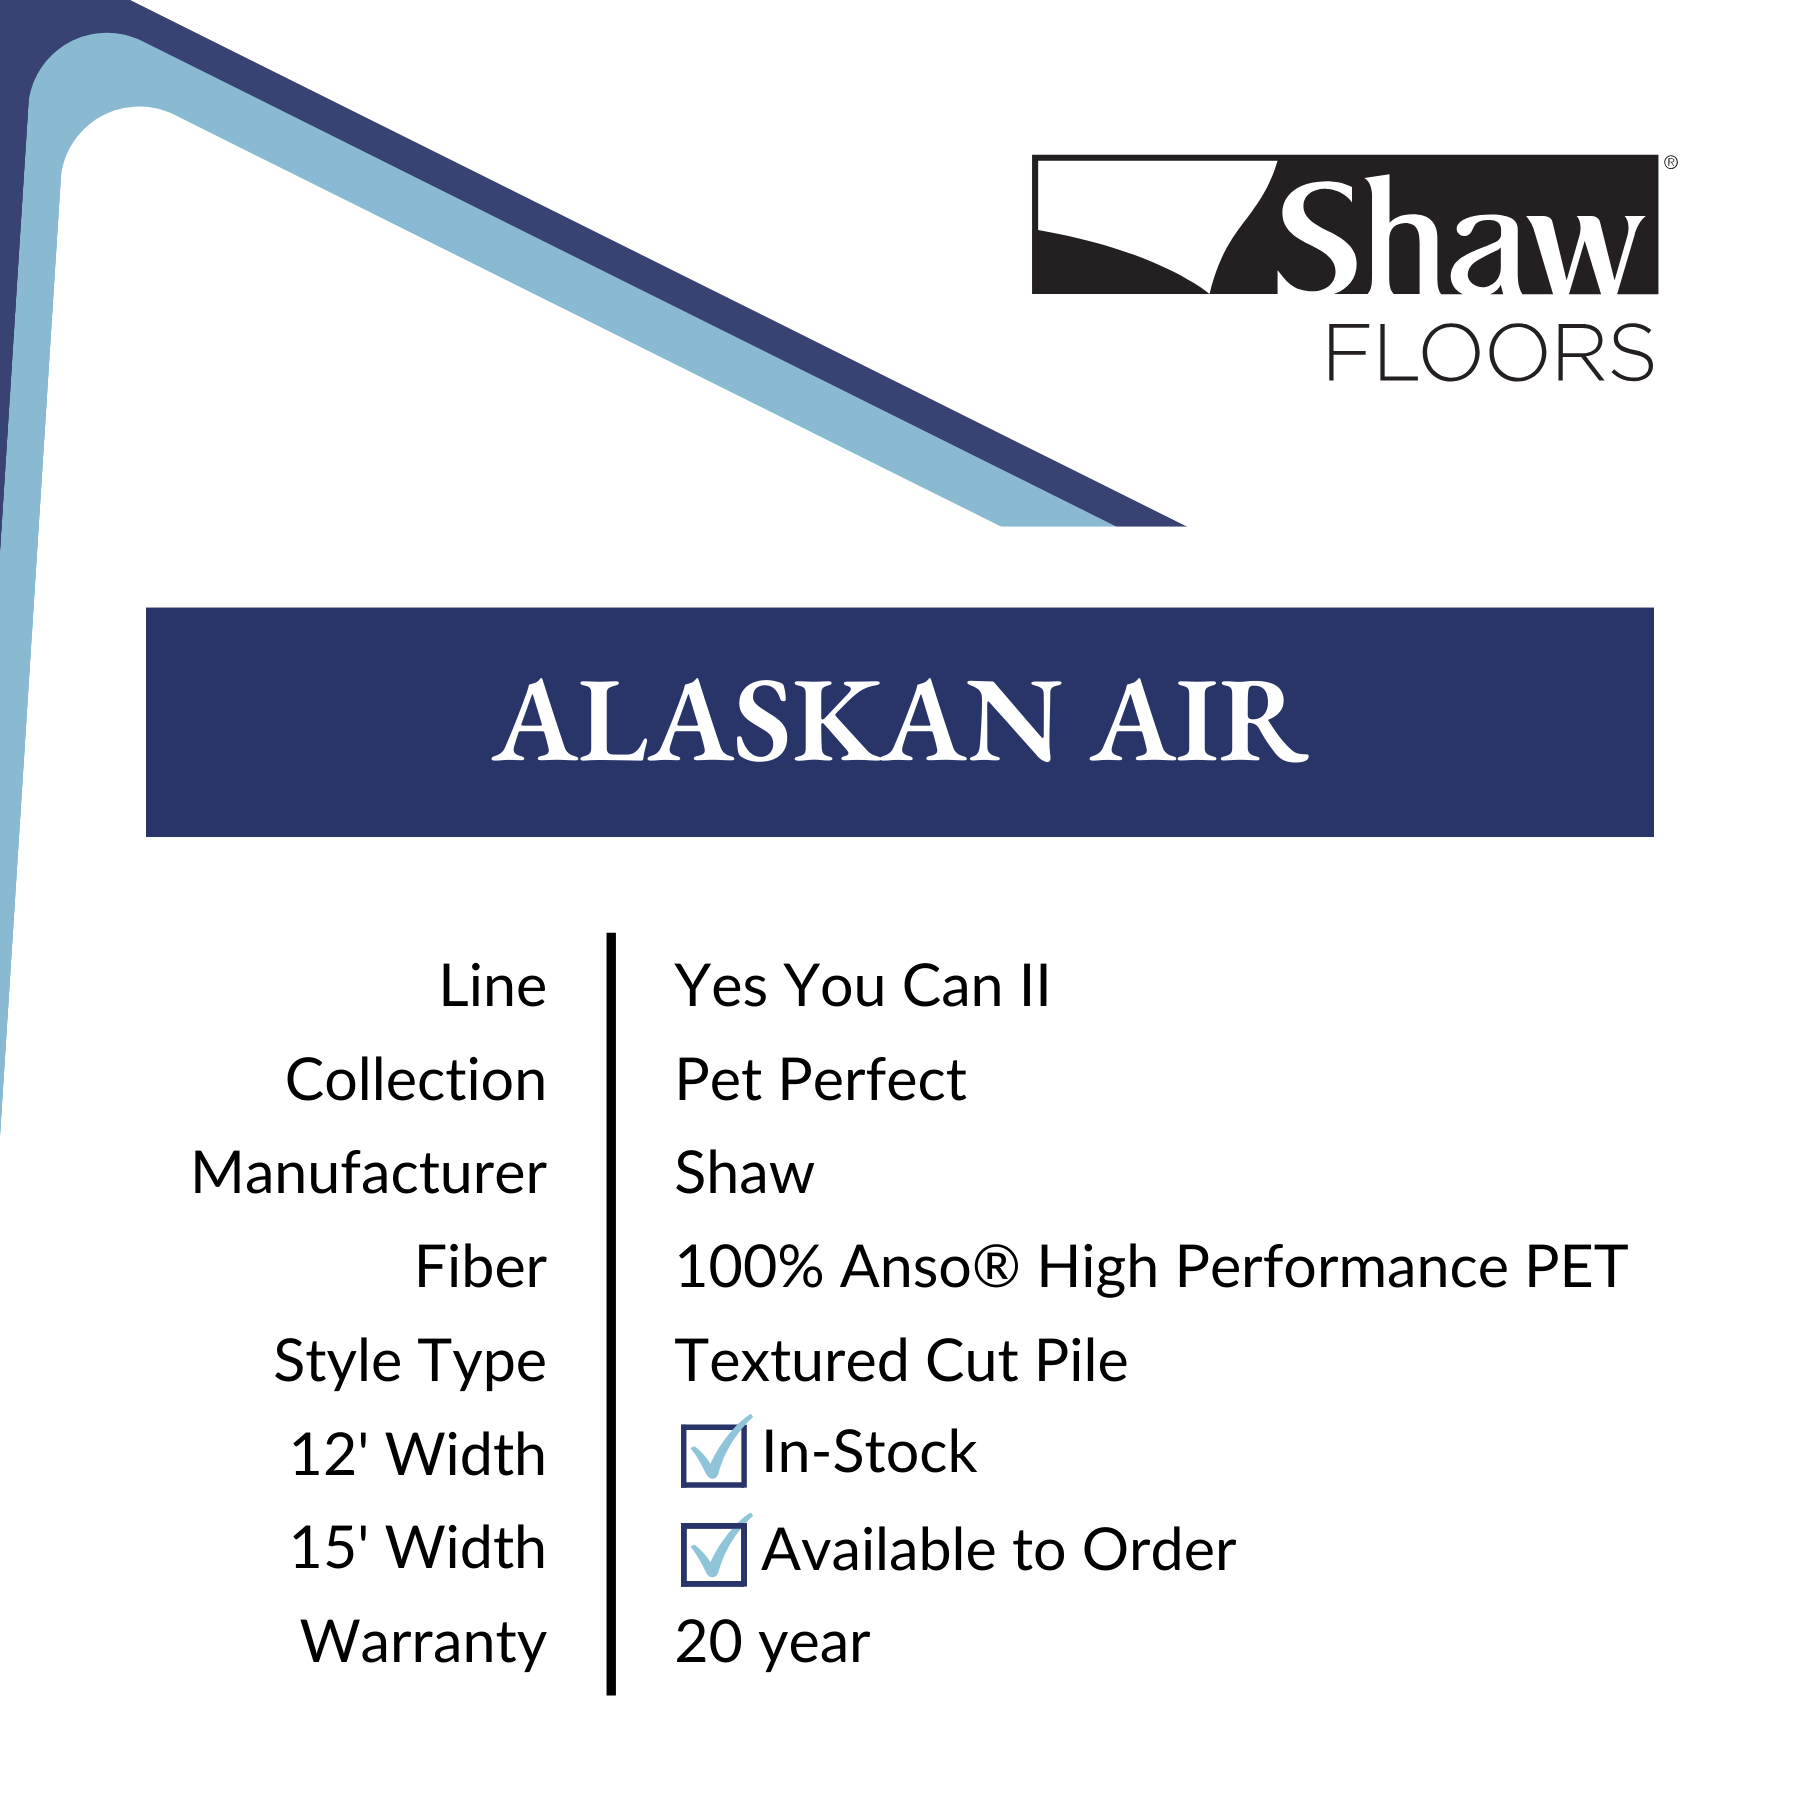 Alaskan Air by Shaw Pet Perfect Carpet Yes You Can II Calhoun's Flooring, Springfield, IL SPECS